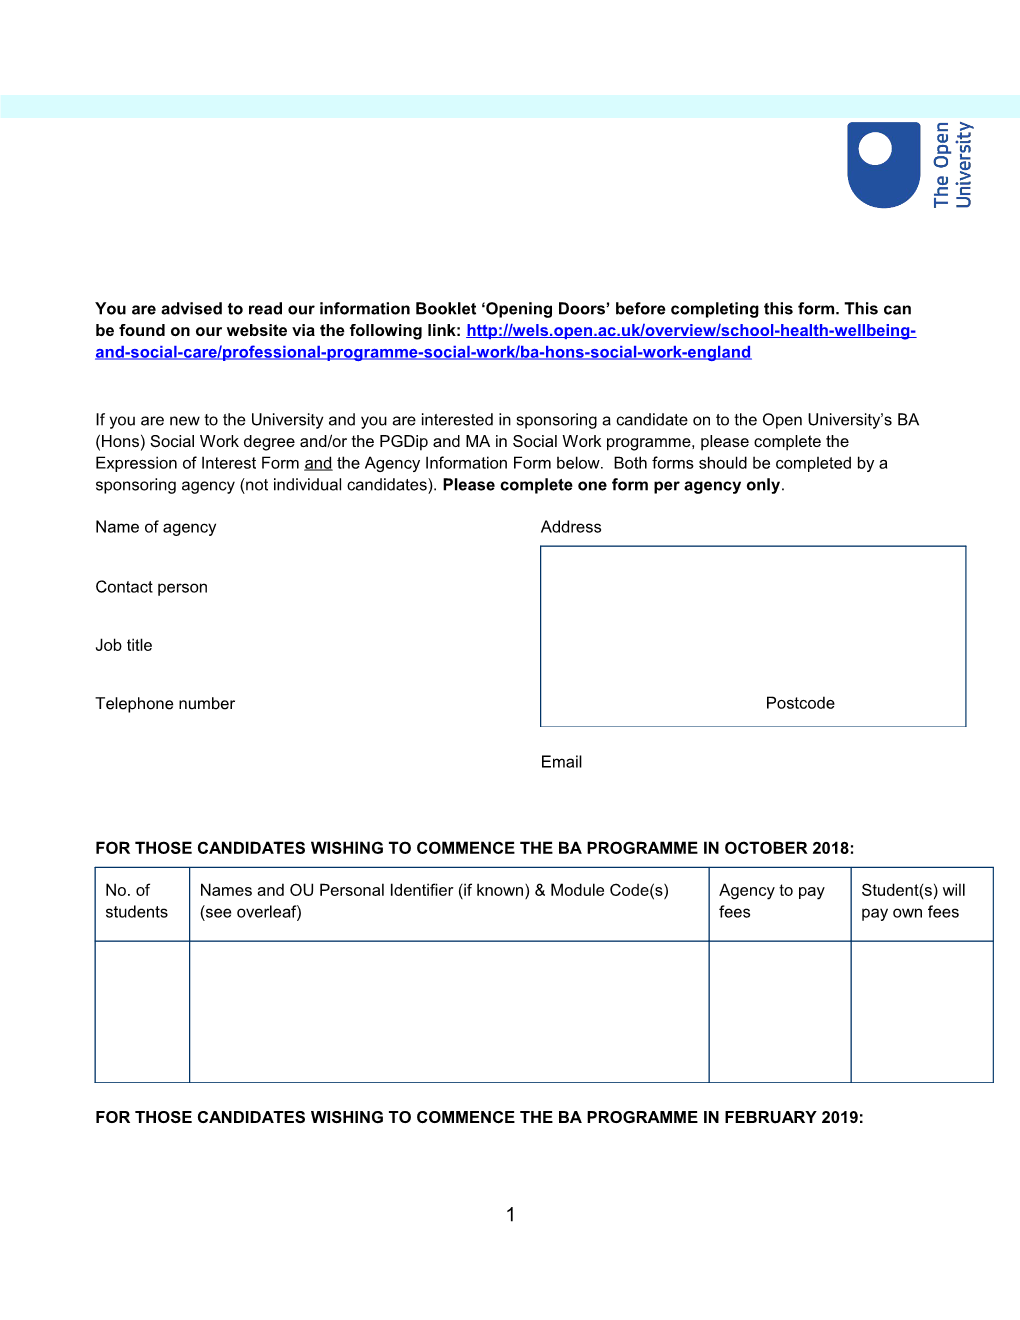 You Are Advised to Read Our Information Booklet Opening Doors Before Completing This Form